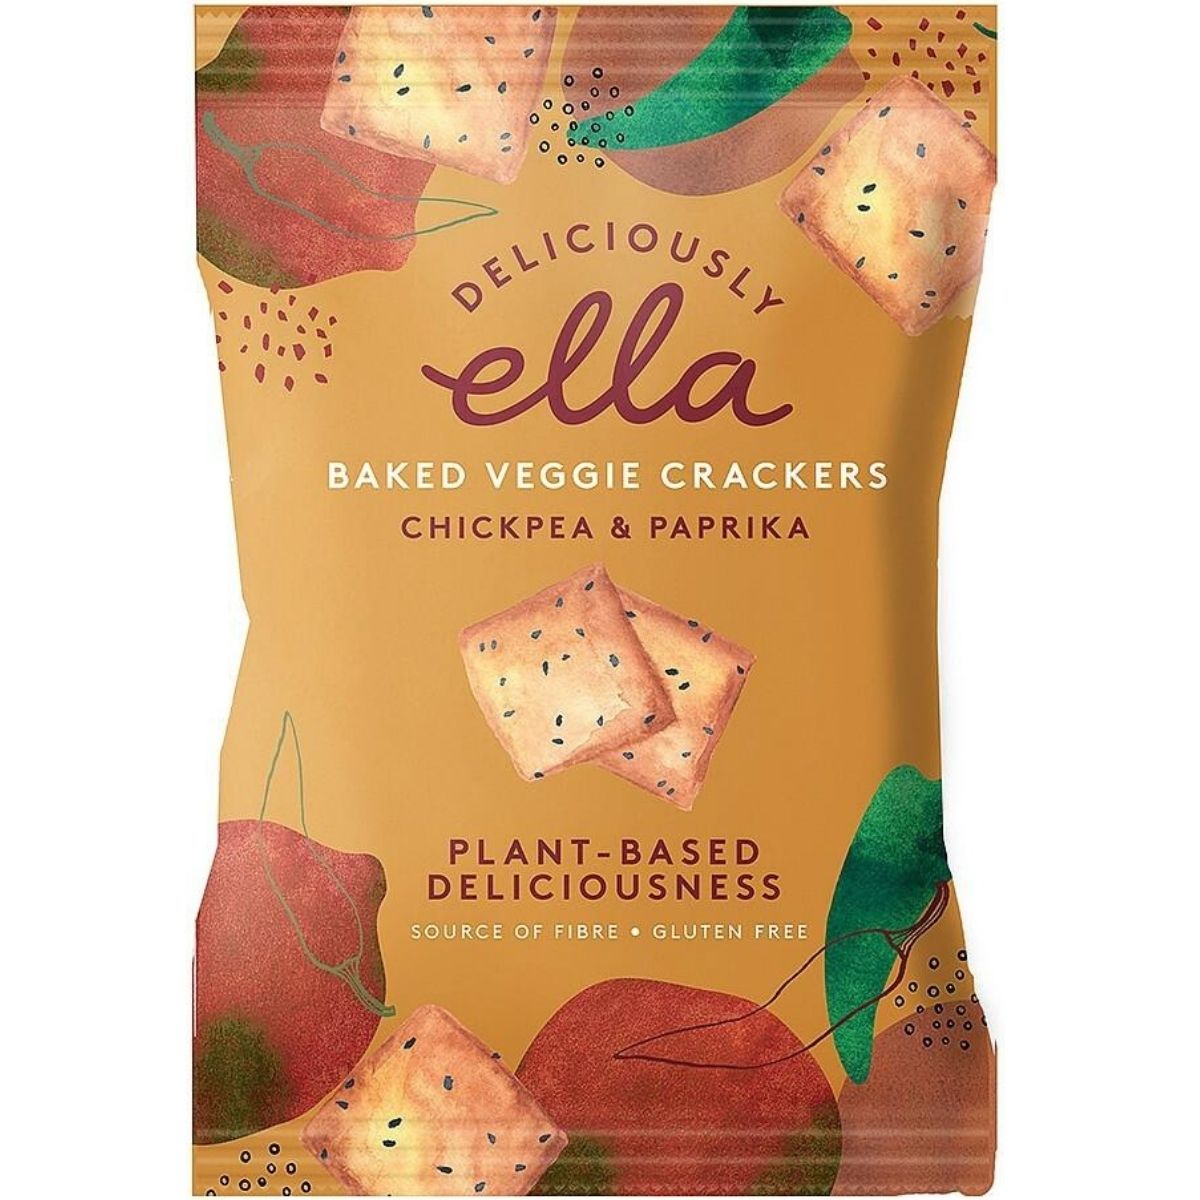 Deliciously Ella Baked Veggie Crackers, Chickpea & Paprika - 100g